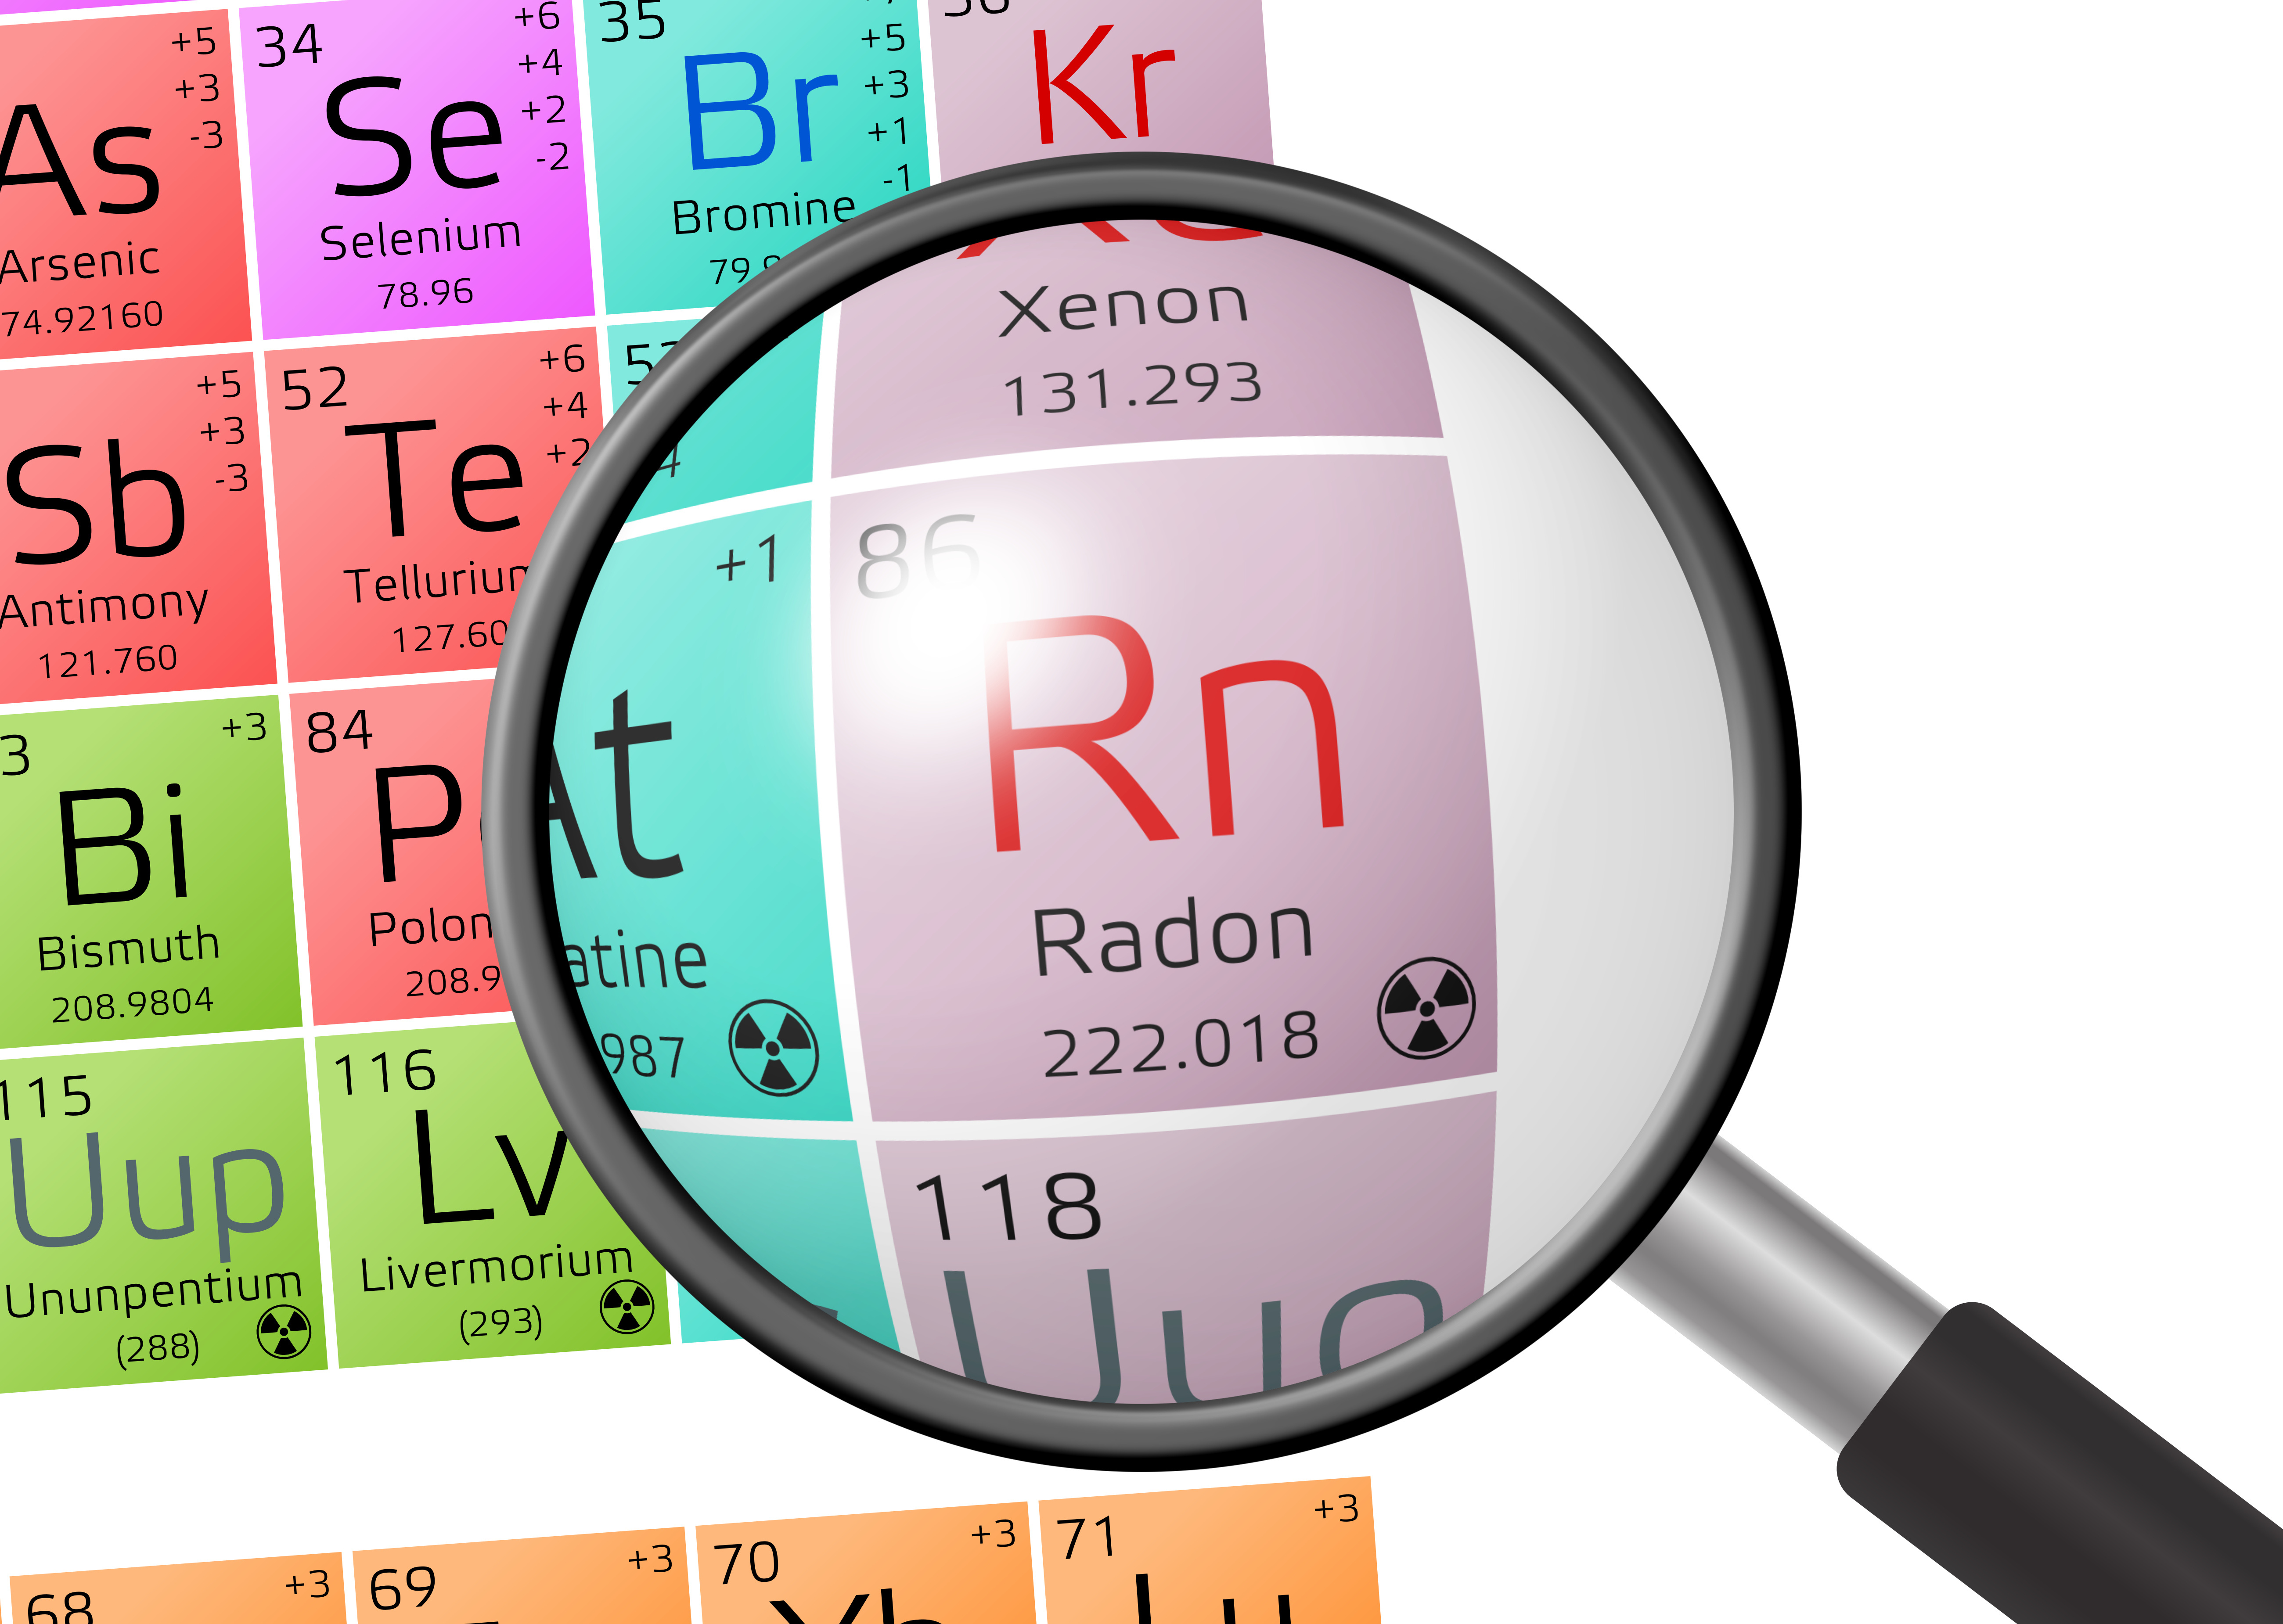 Image of Radon element, which is radioactive and dangerous in a home